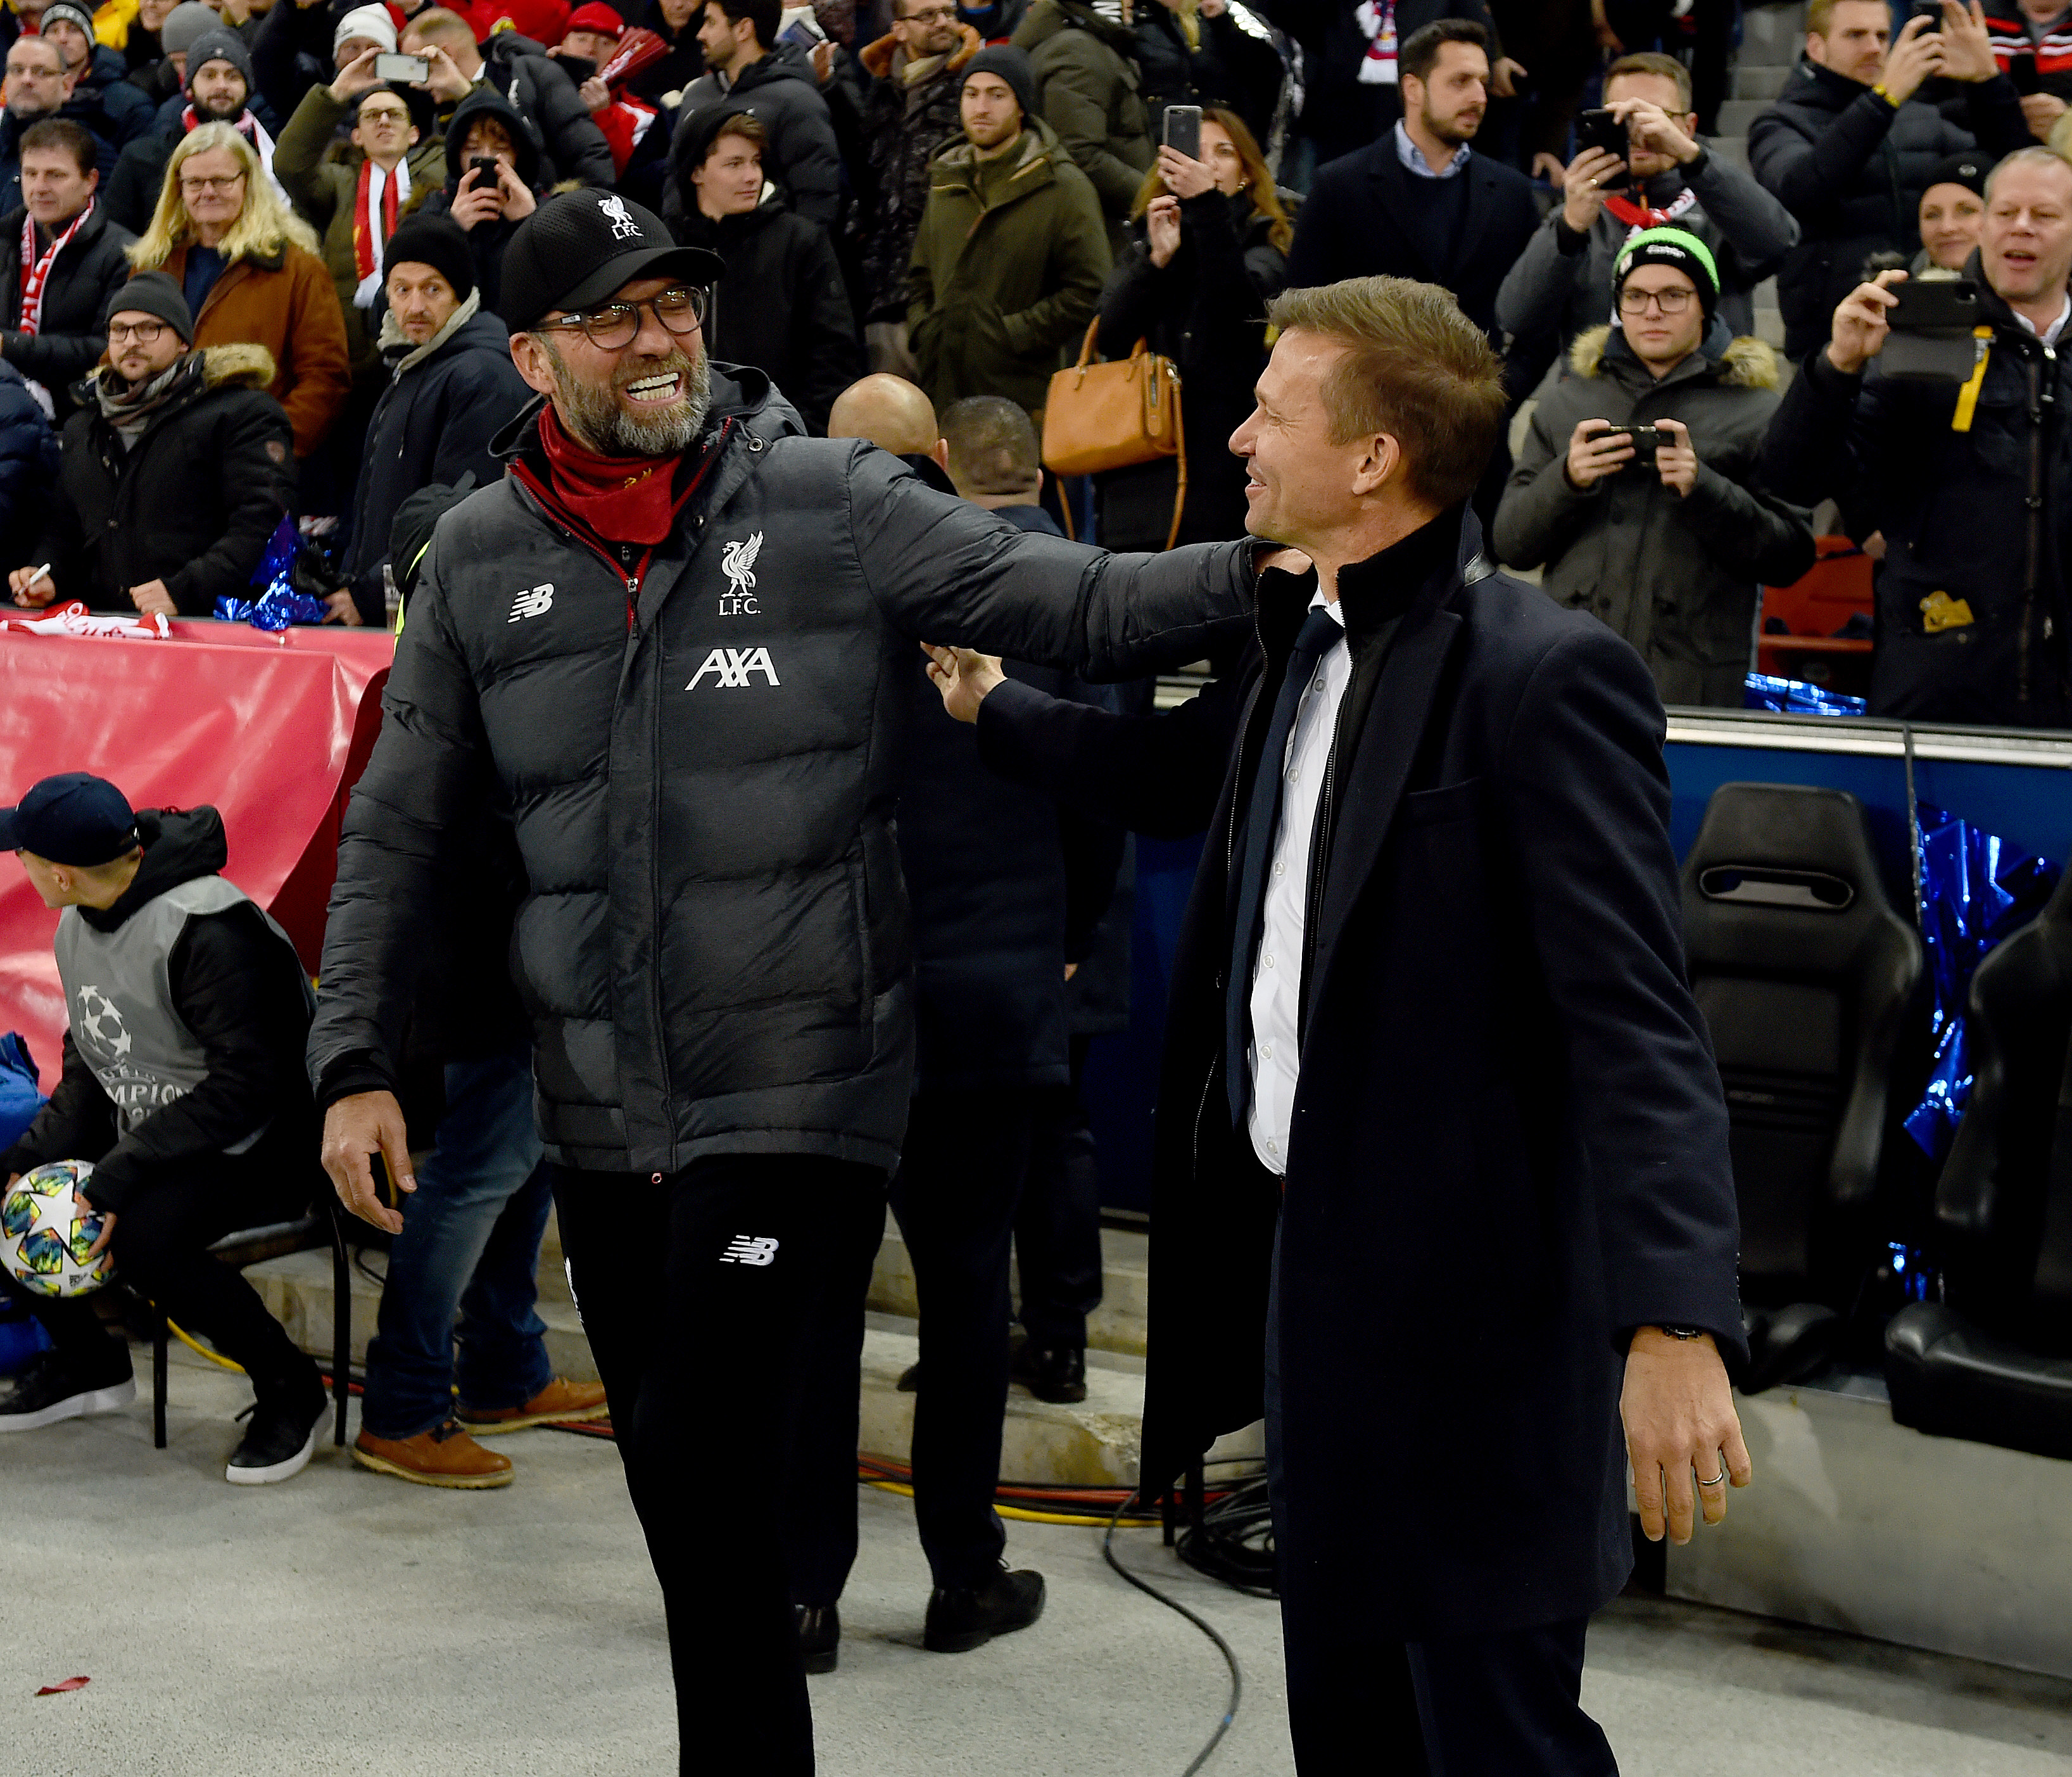 Jürgen Klopp Manager of Liverpool with Jesse Marsch Manager of RB Salzburg during the UEFA Champions Le ague group E match between RB Salzburg and Liverpool FC at Red Bull Arena on December 10, 2019 in Salzburg, Austria.